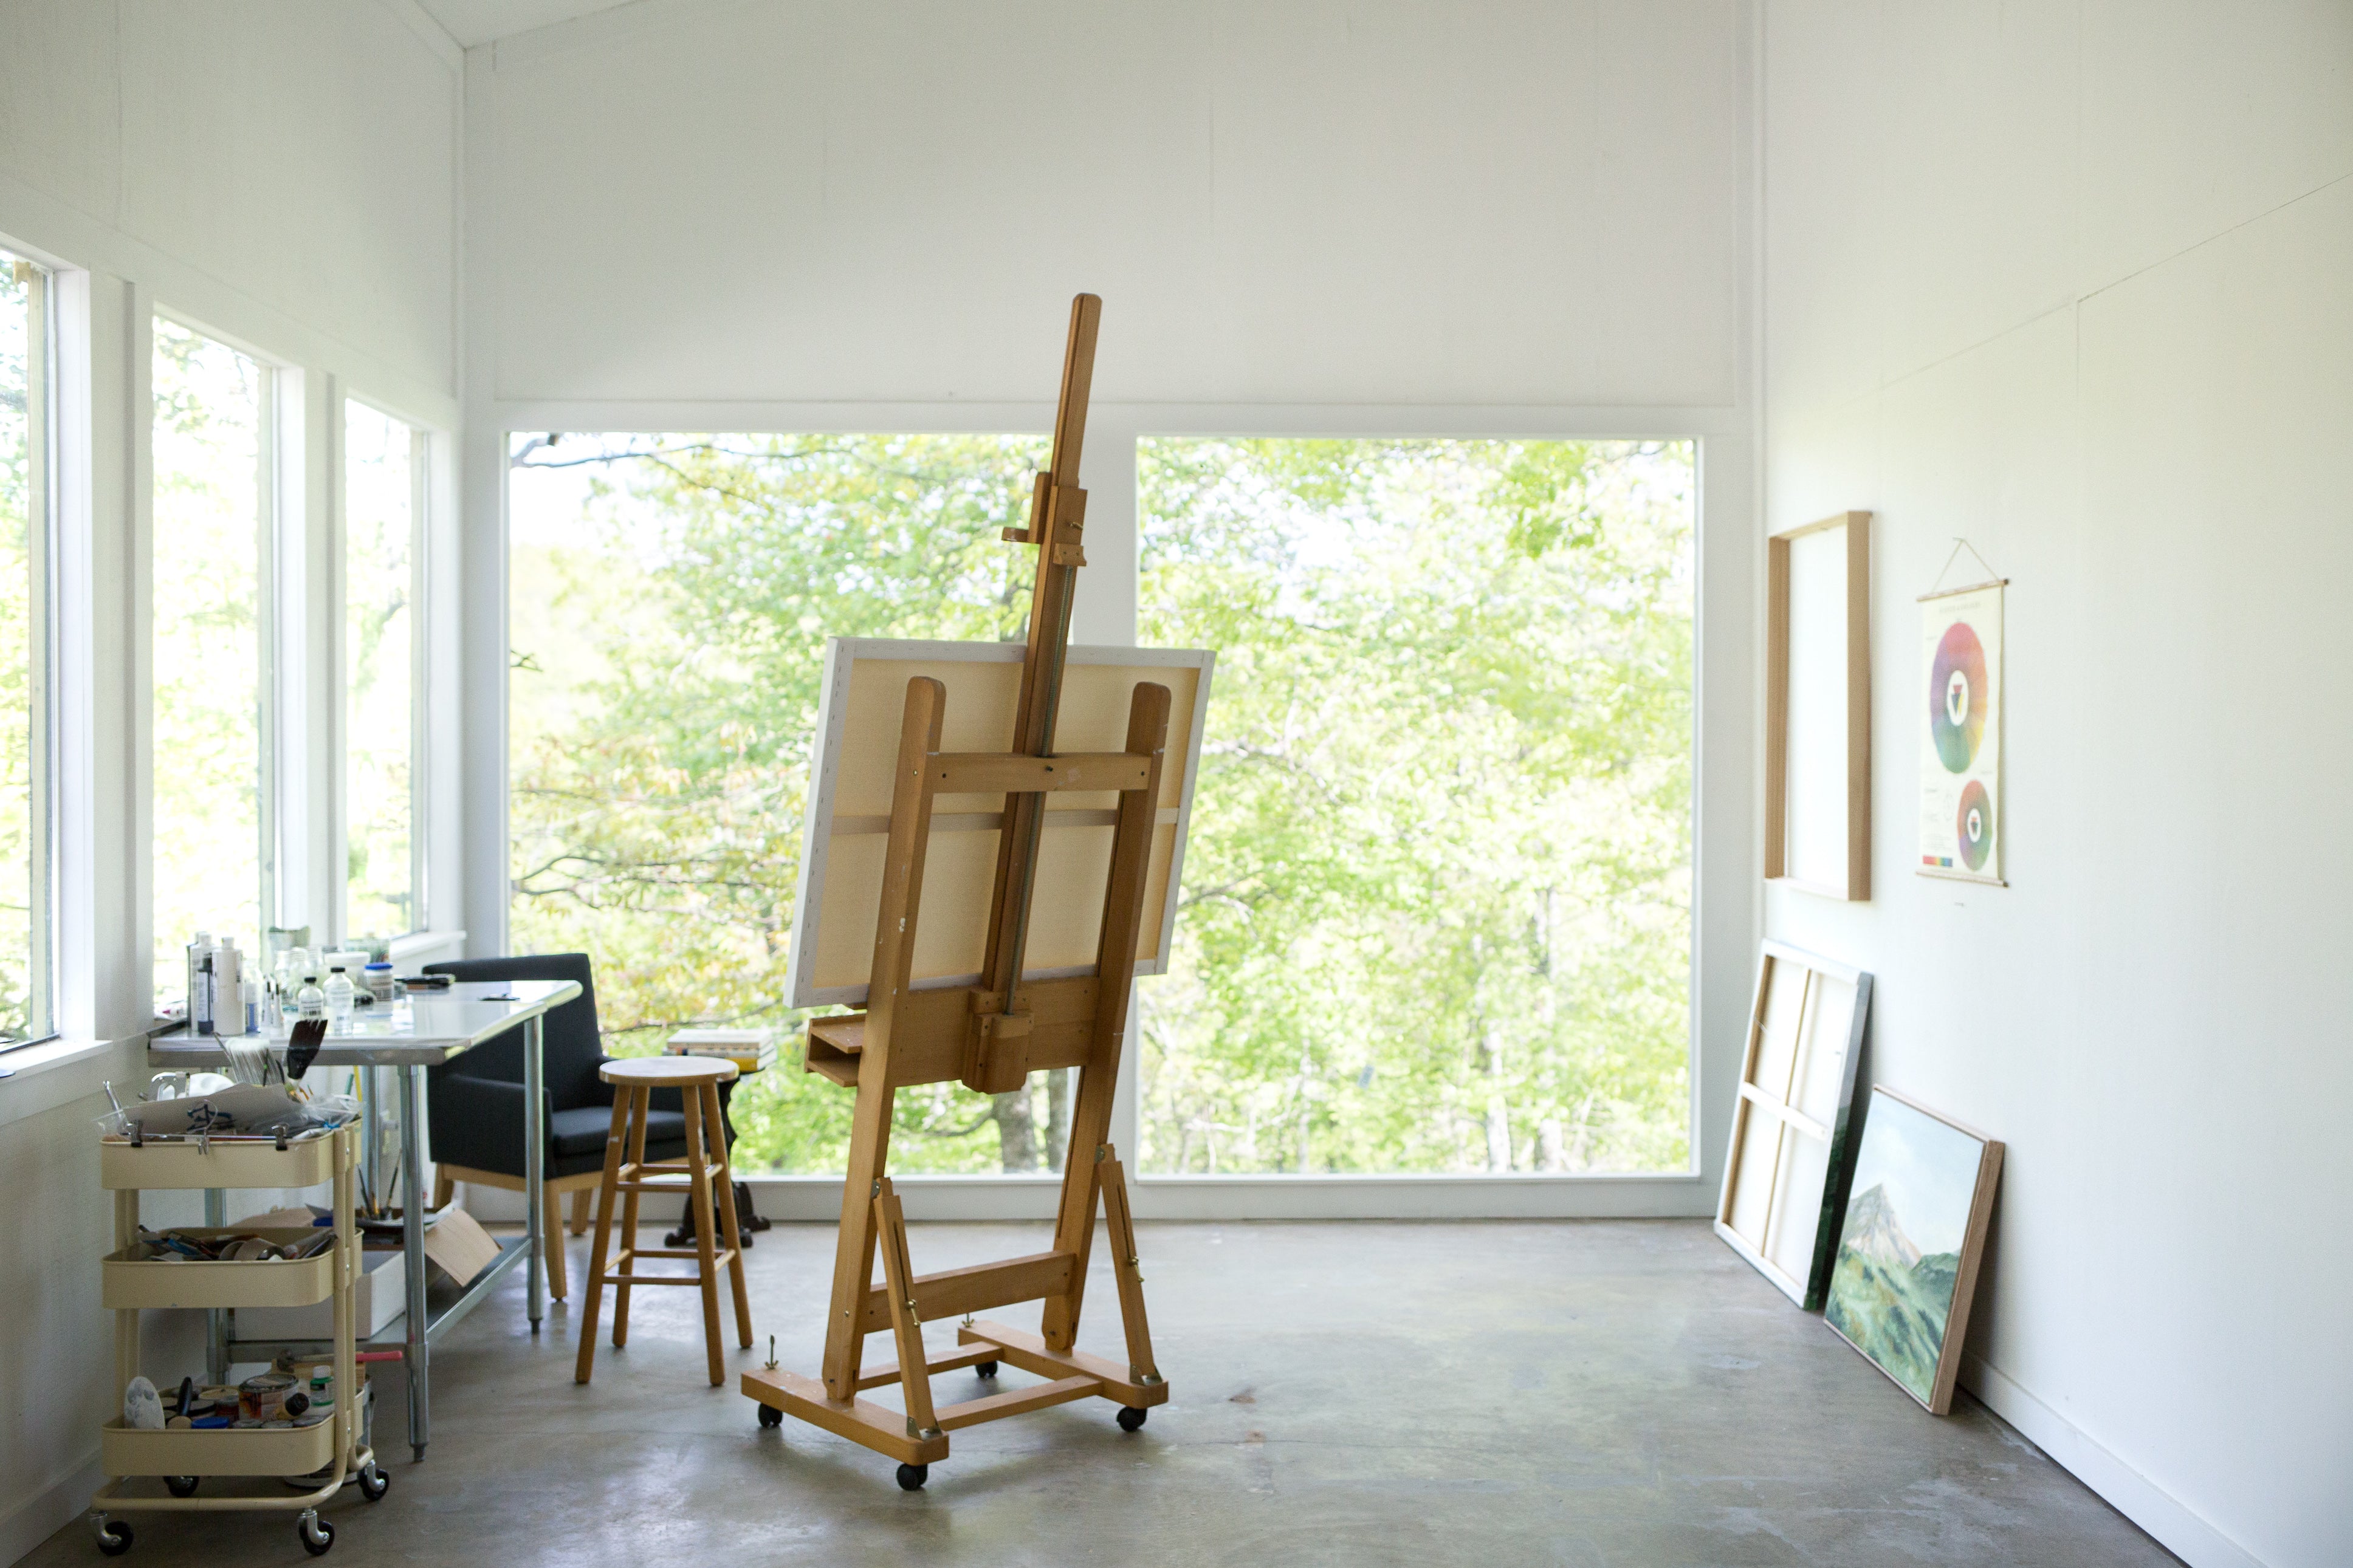 5 Things You Will Need From A Table Top Easel